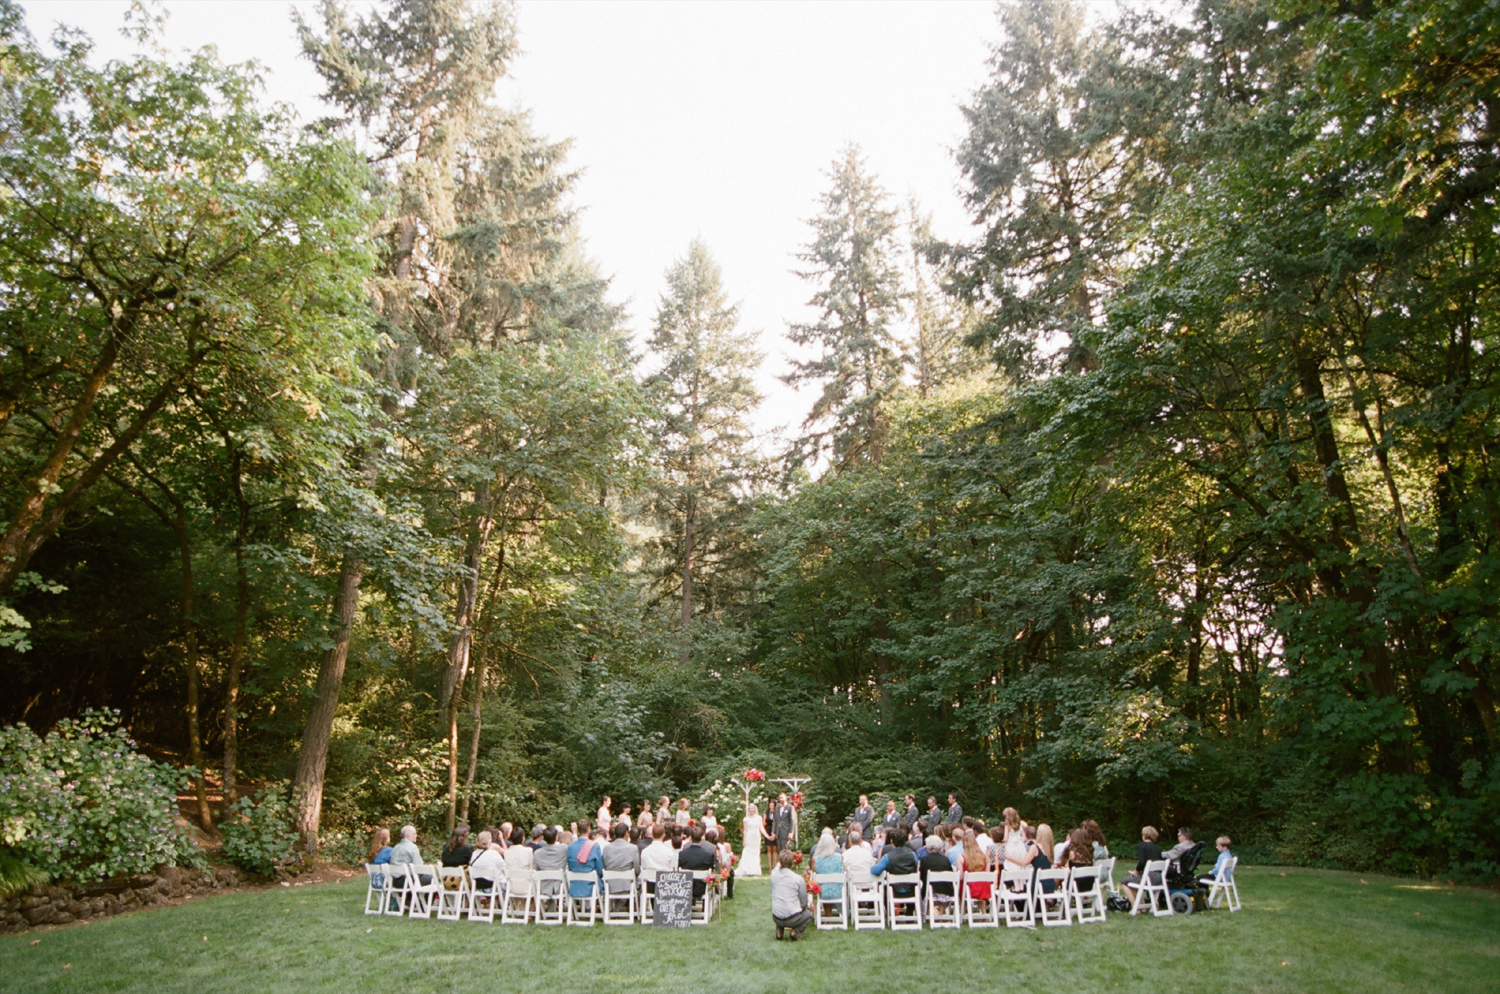 Bridalbliss.com | Portland Wedding | Oregon Event Planning and Design | You Look Good Today Photography 